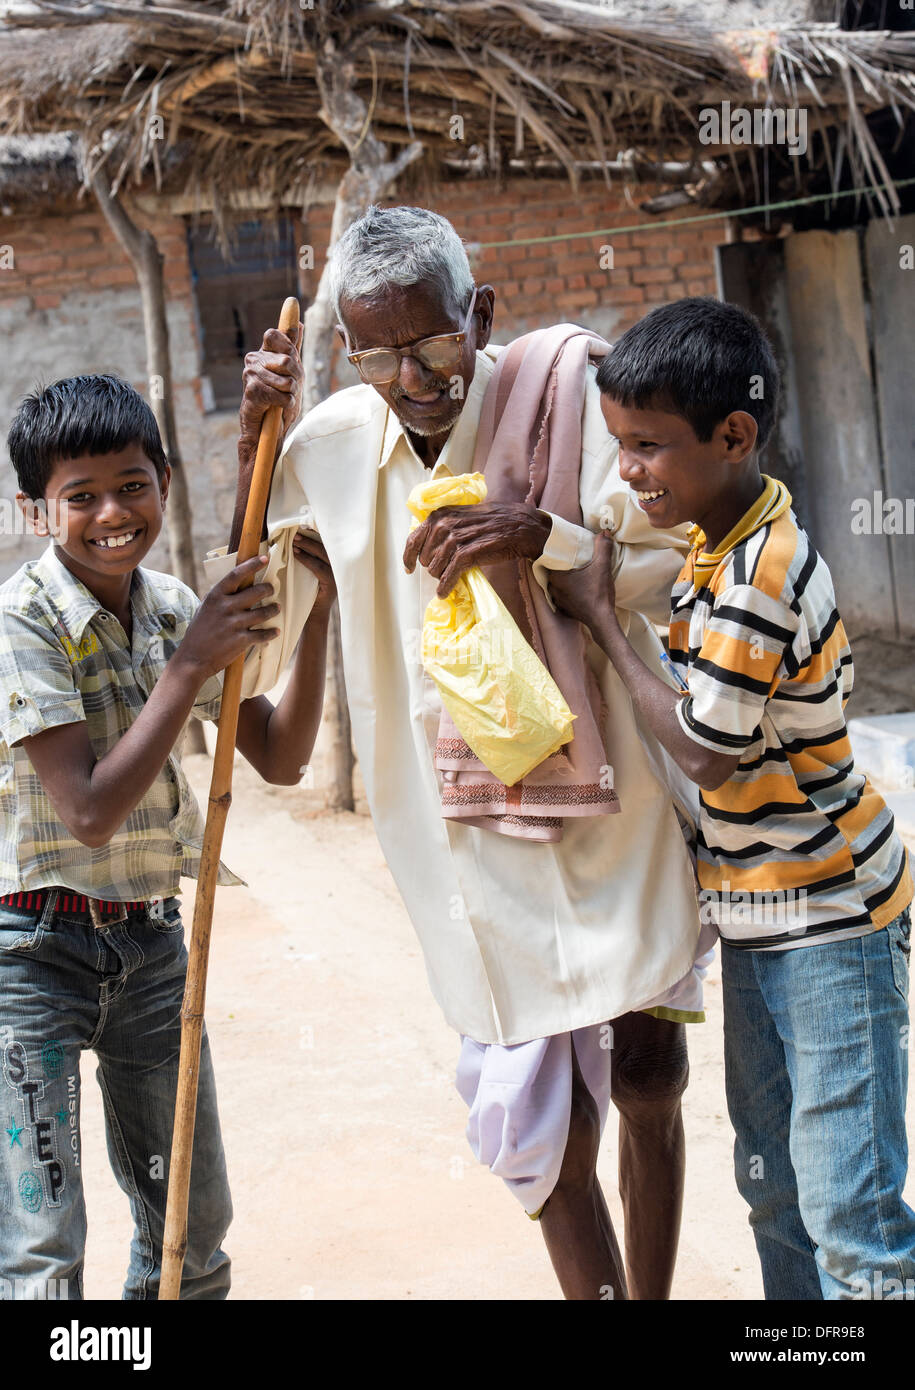 Two Indian boys helping an old Indian man with walking stick at Sri Sathya Sai Baba mobile outreach hospital. India Stock Photo